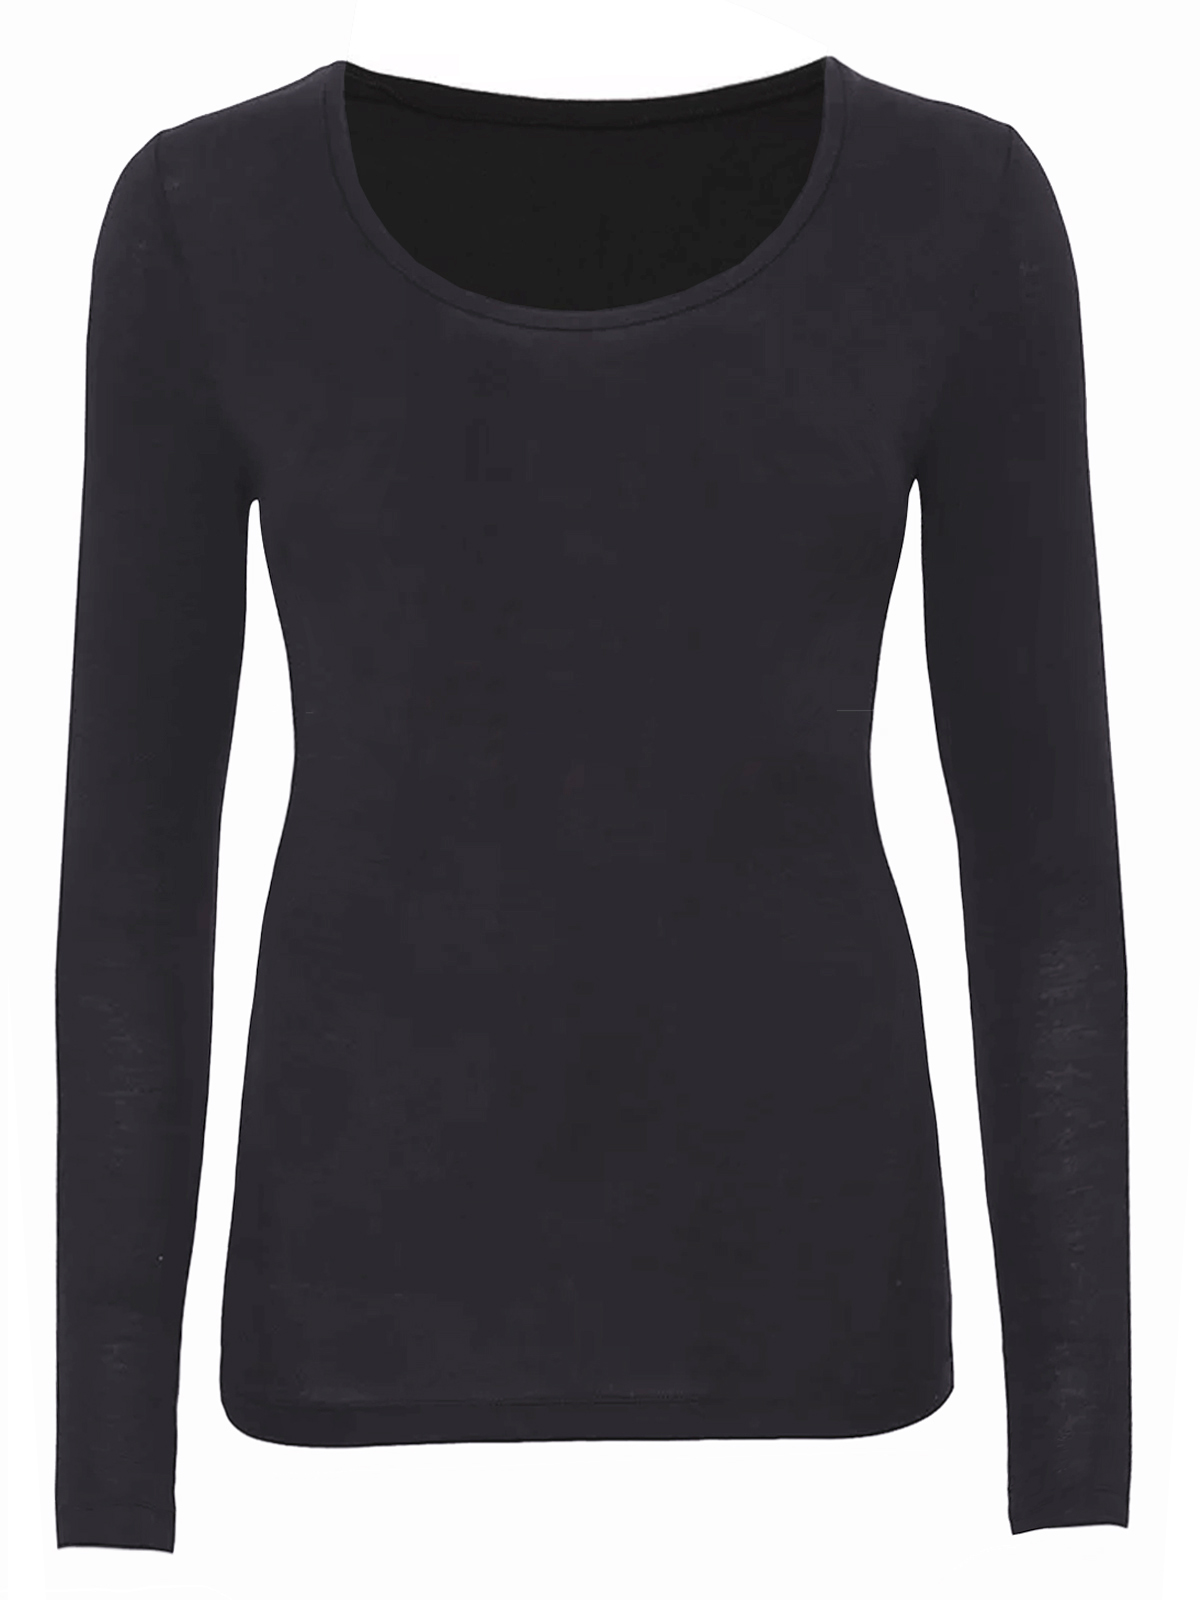 Assorted Heatgen Thermal Tops - Size 10 to 16